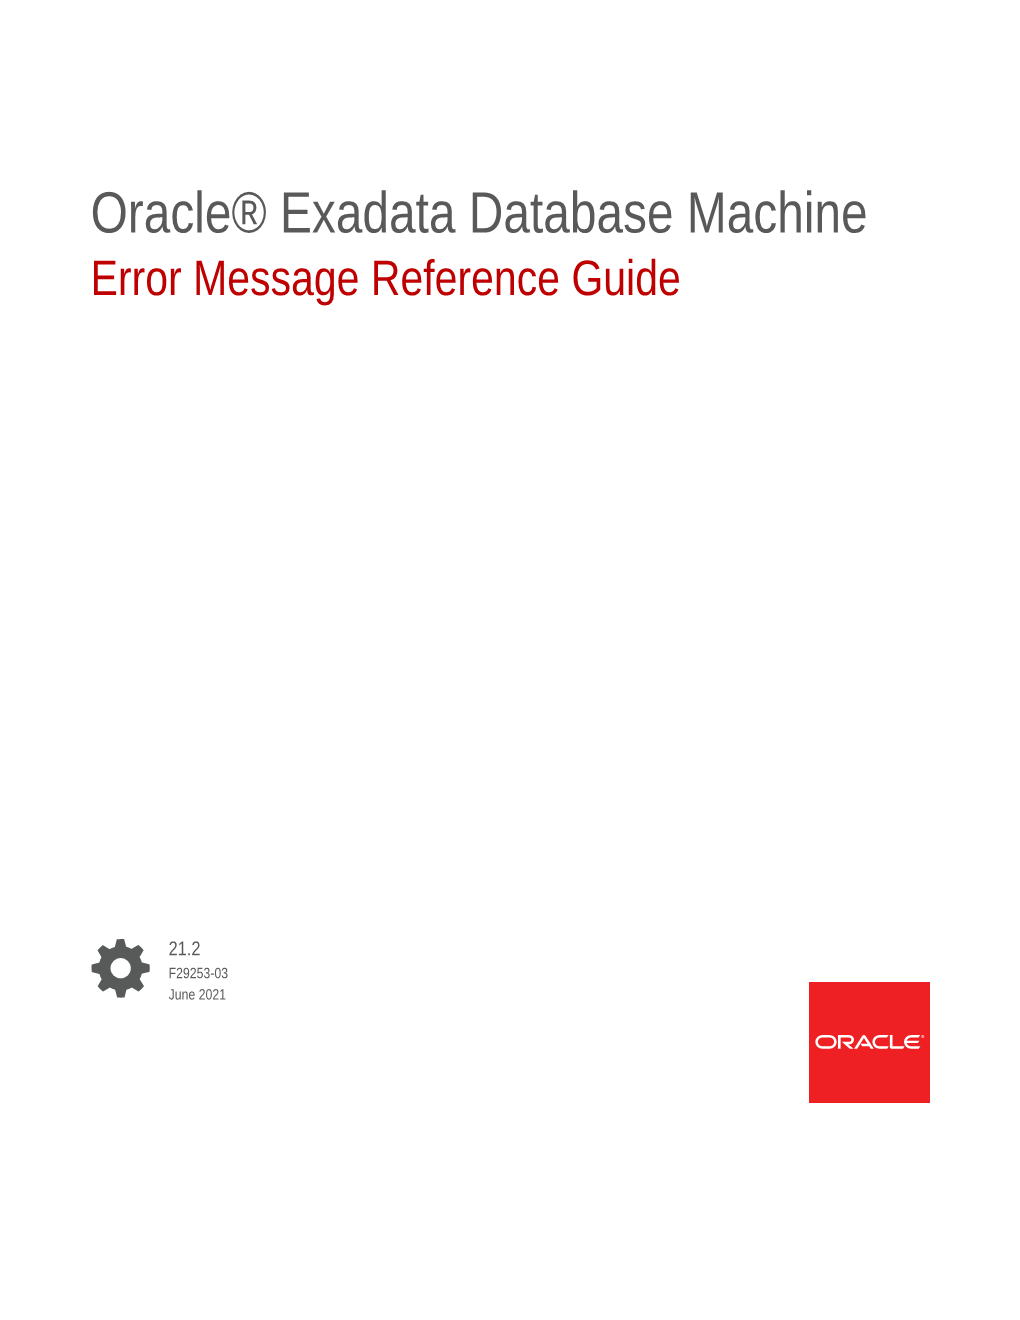 Oracle® Exadata Database Machine Error Message Reference Guide